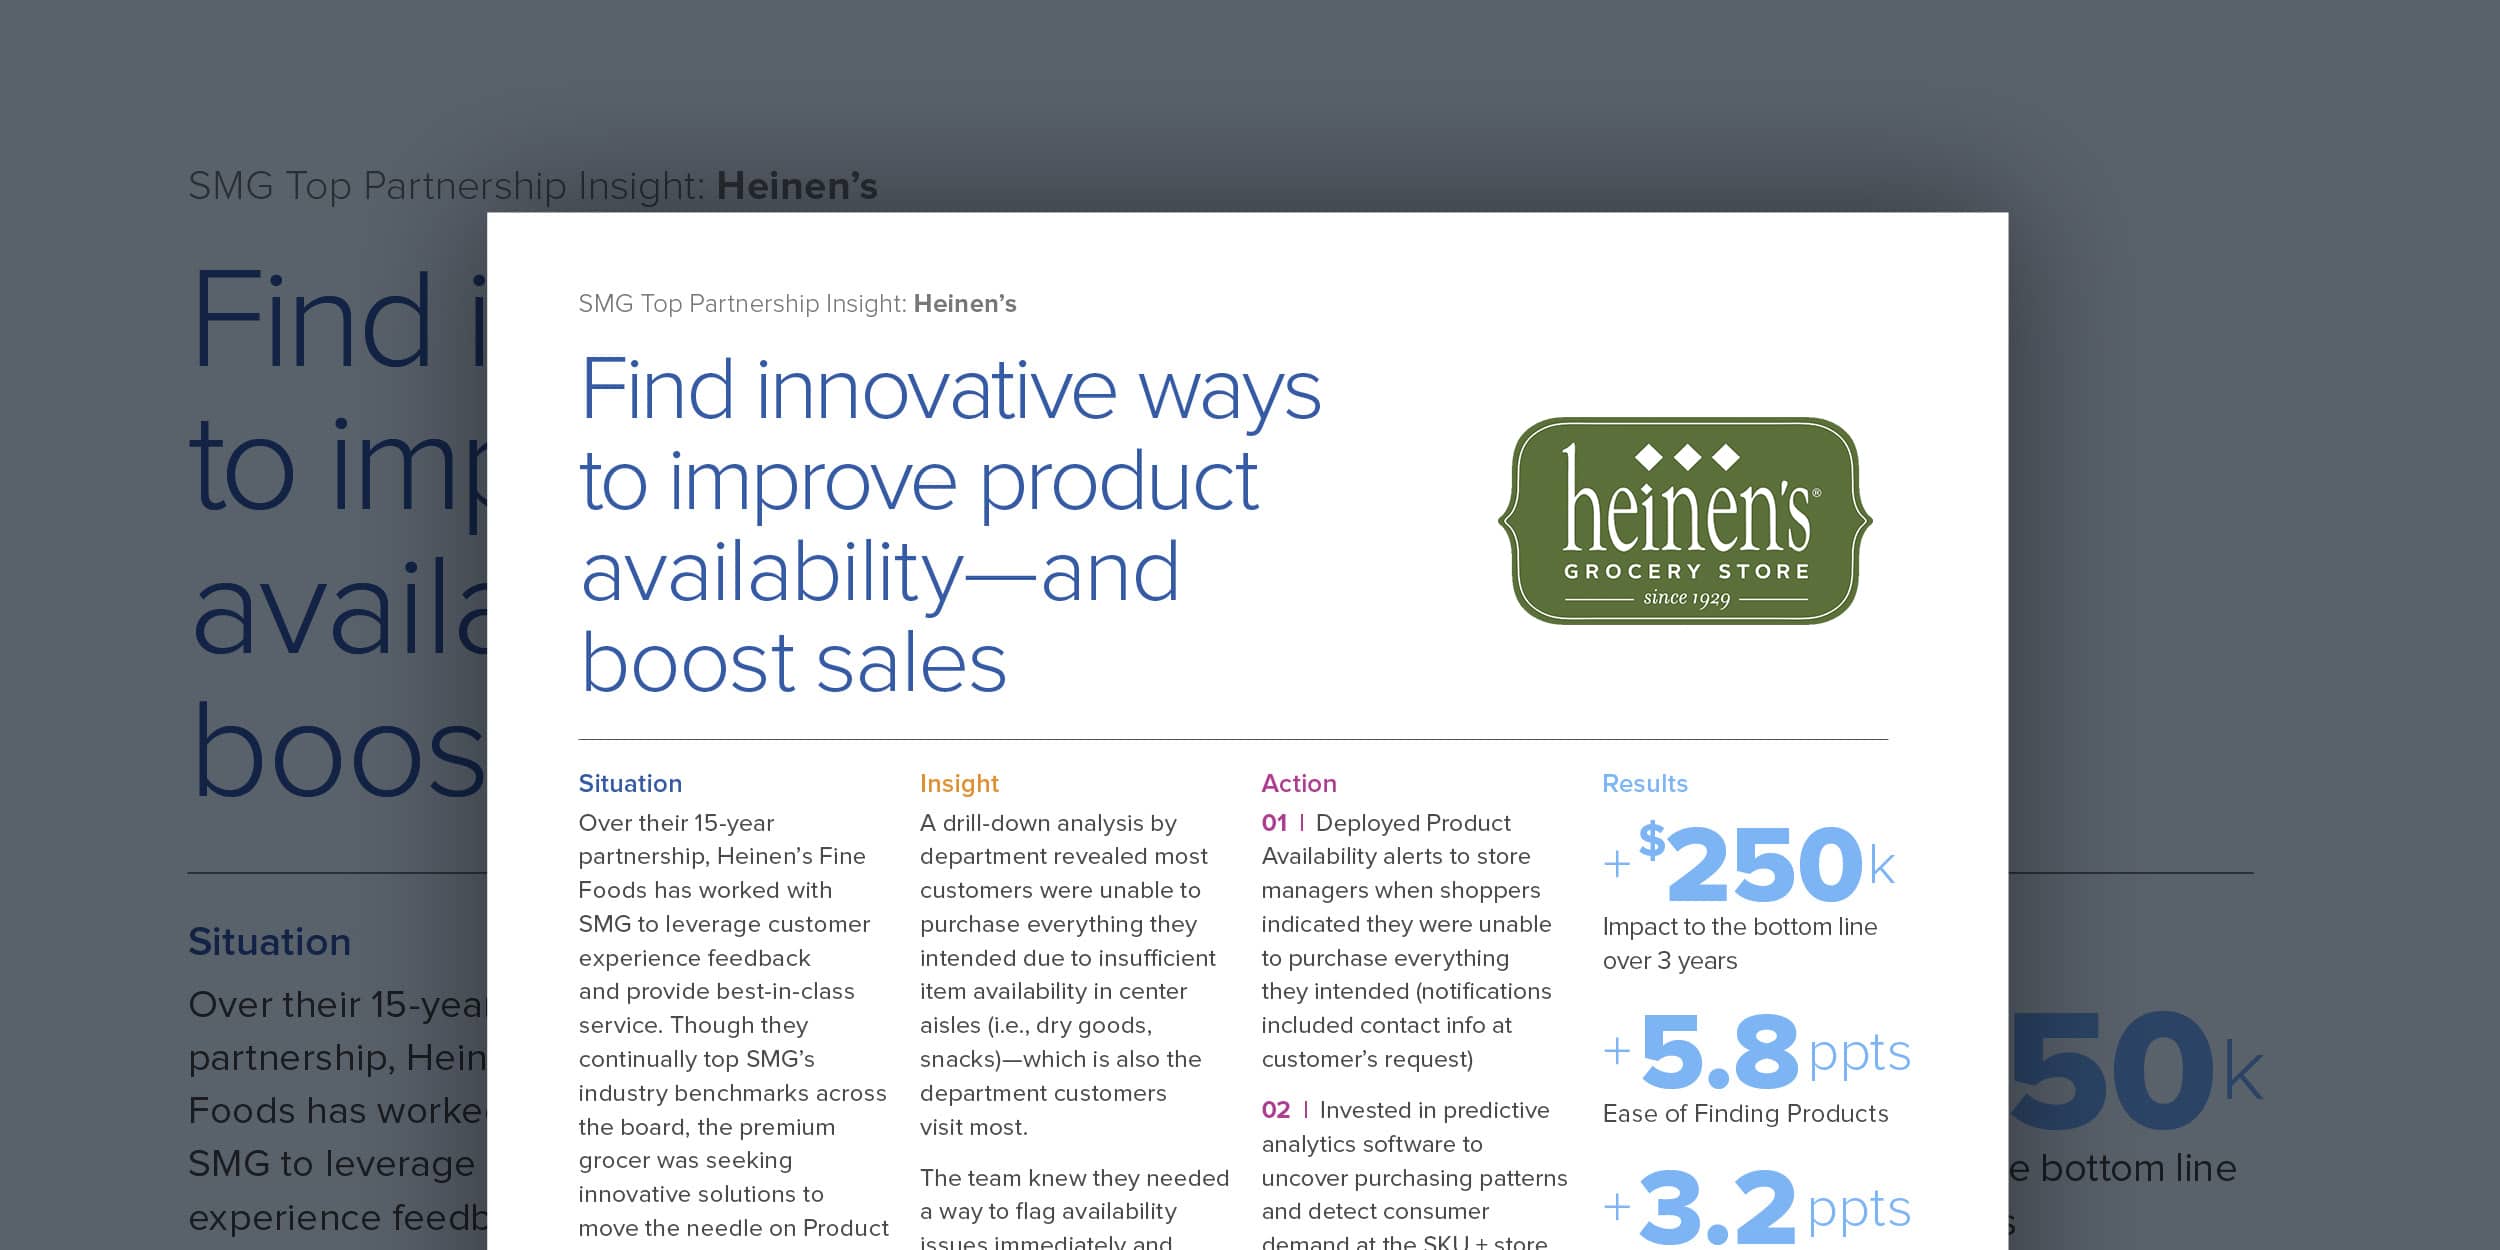 Find innovative ways to improve product availability—and boost sales